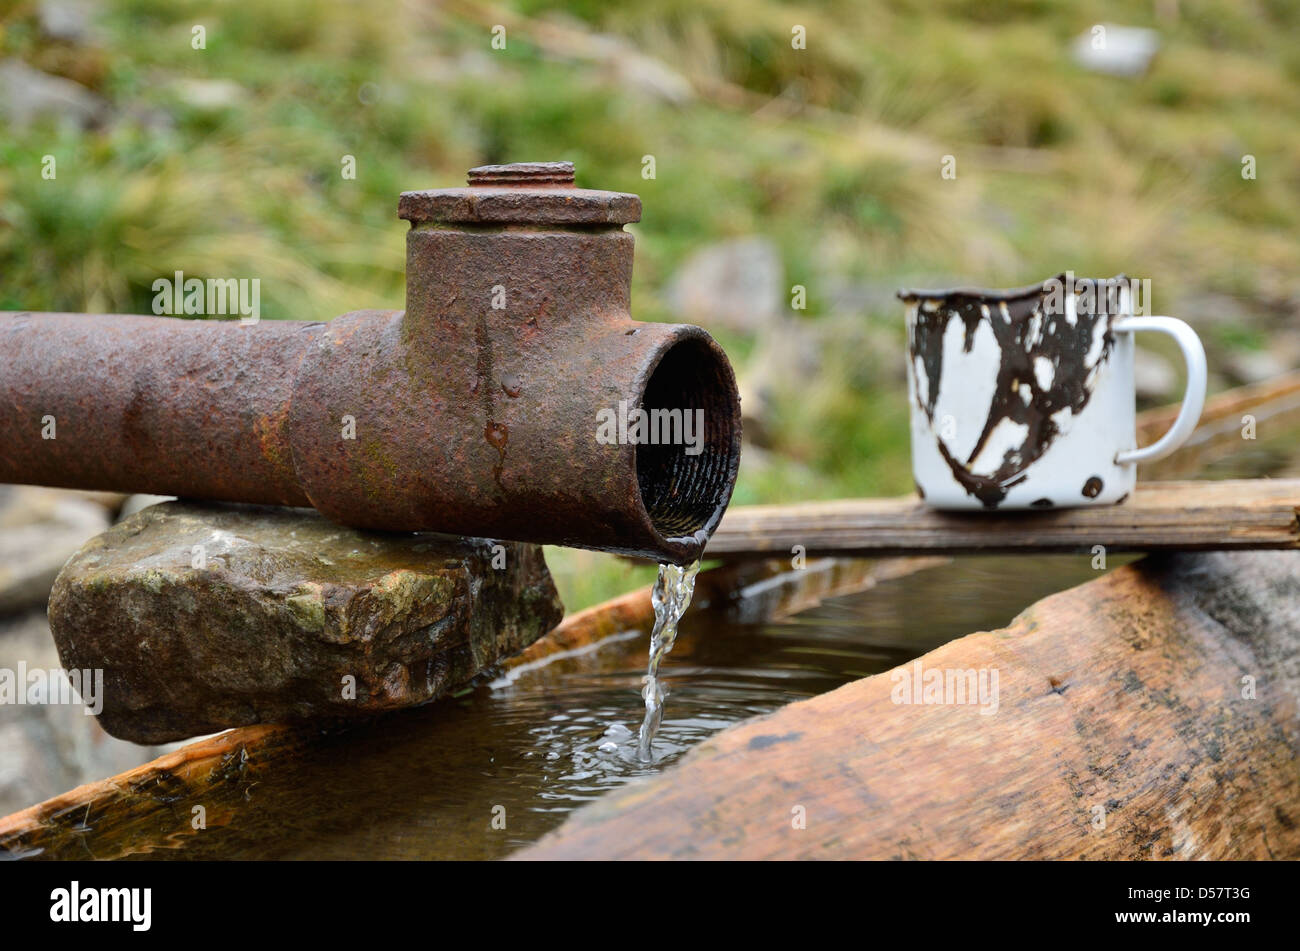 Drinking or watering place. Stock Photo